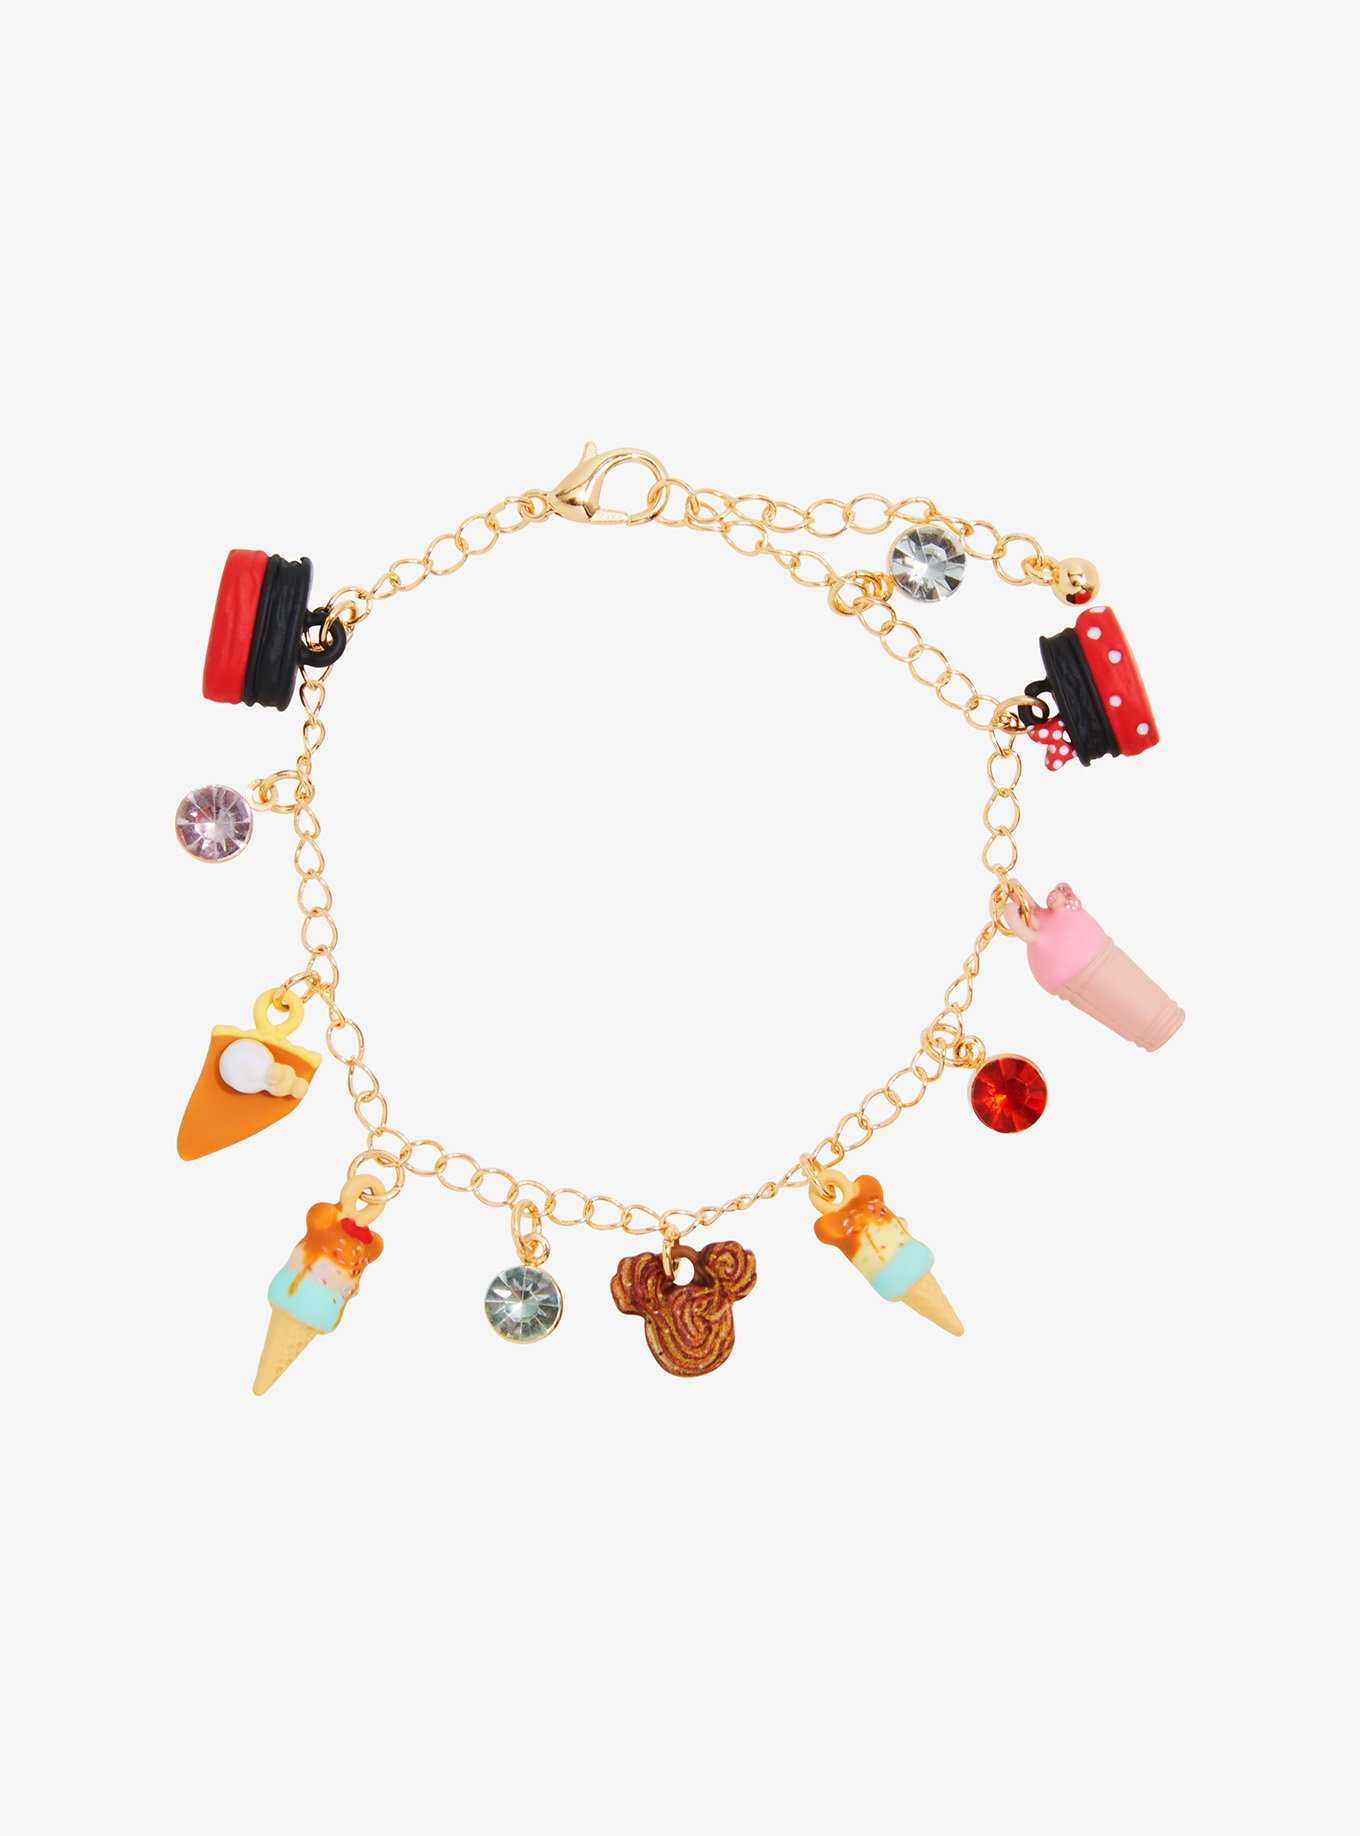 Harry Potter Charm Bracelet Watch - BoxLunch Exclusive, BoxLunch